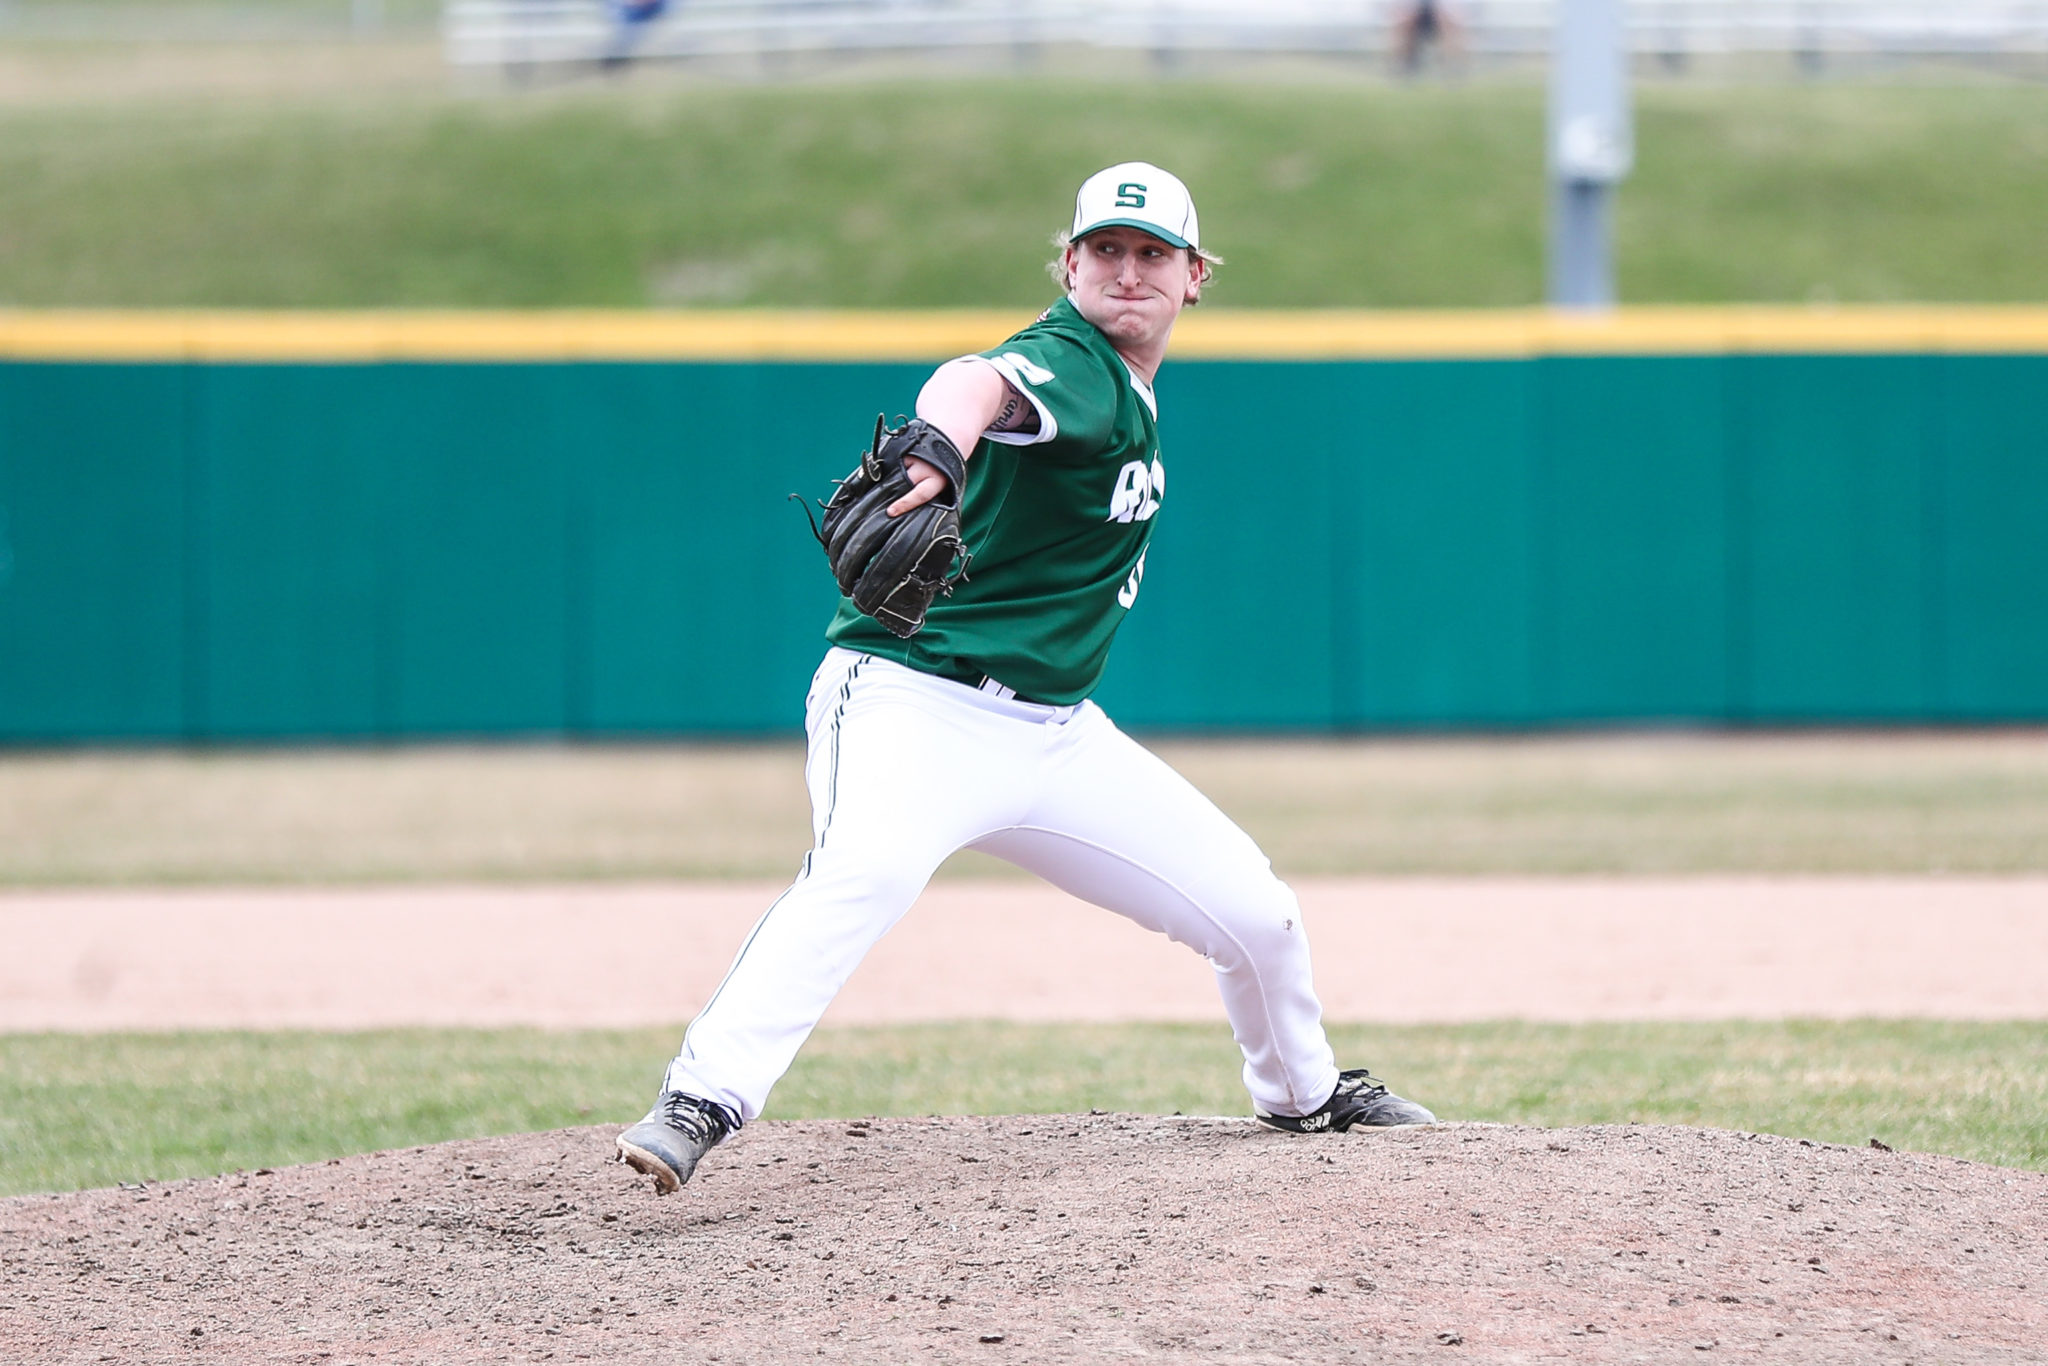 Rock Baseball readies for return to the field The Rocket